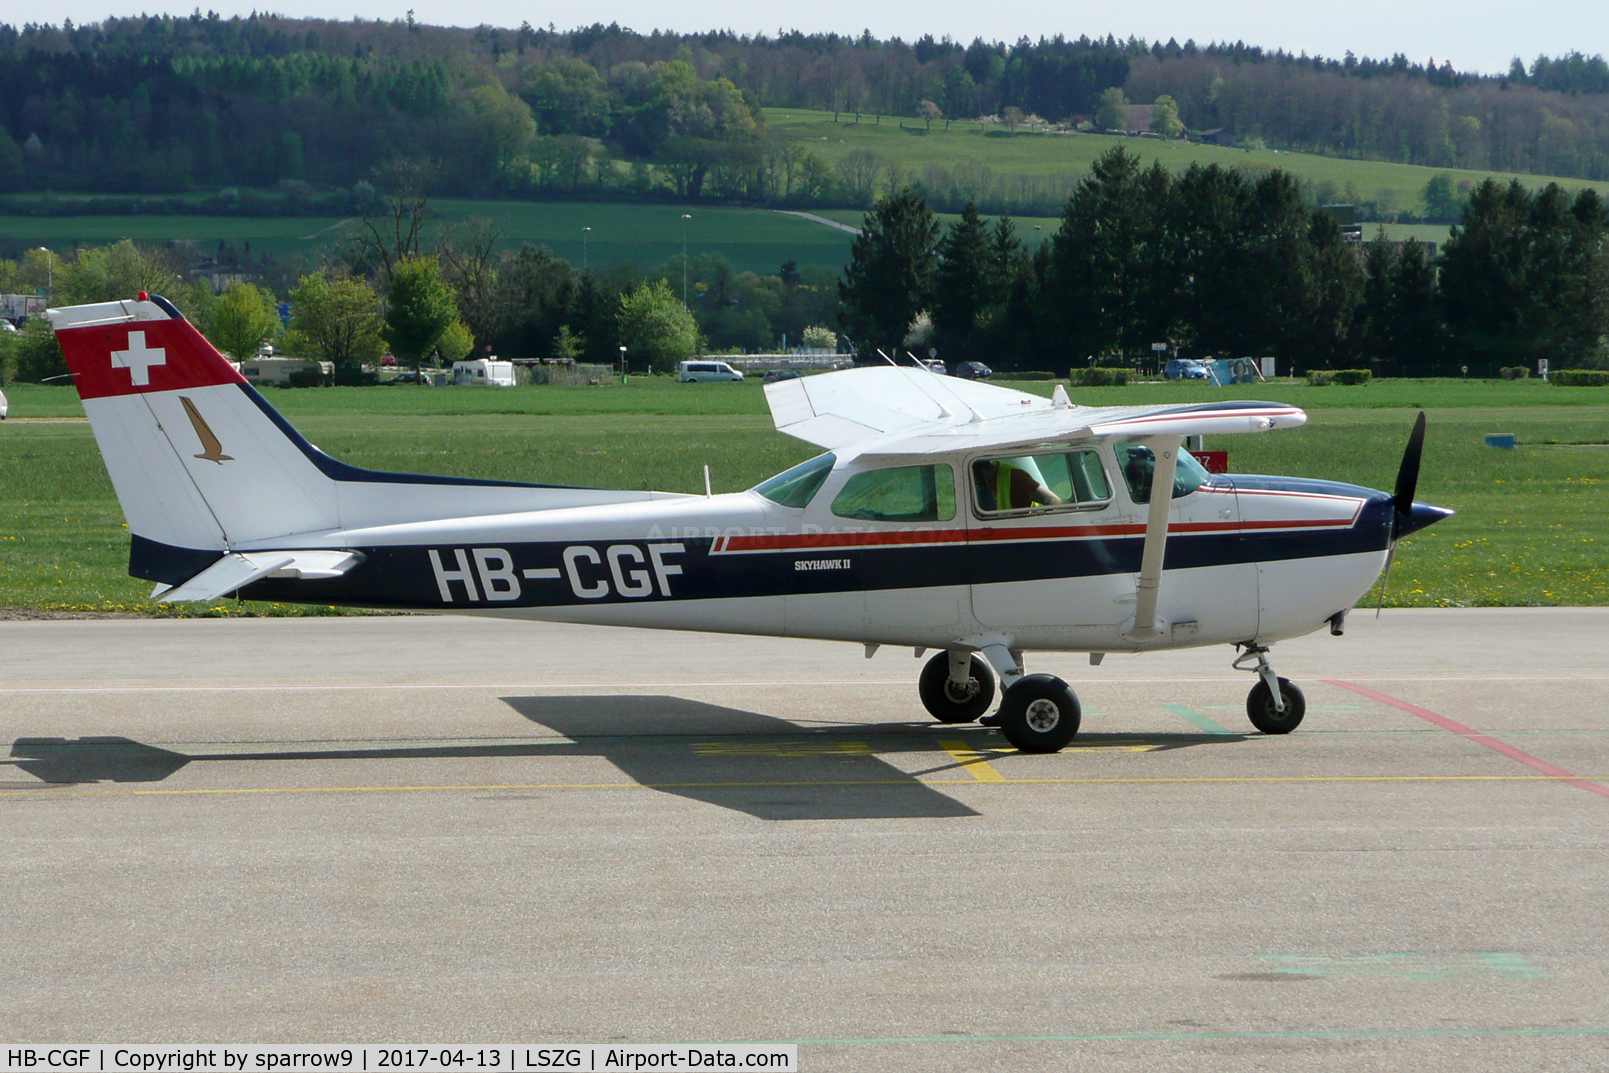 HB-CGF, 1980 Reims F172P C/N 2040, at Grenchen airport